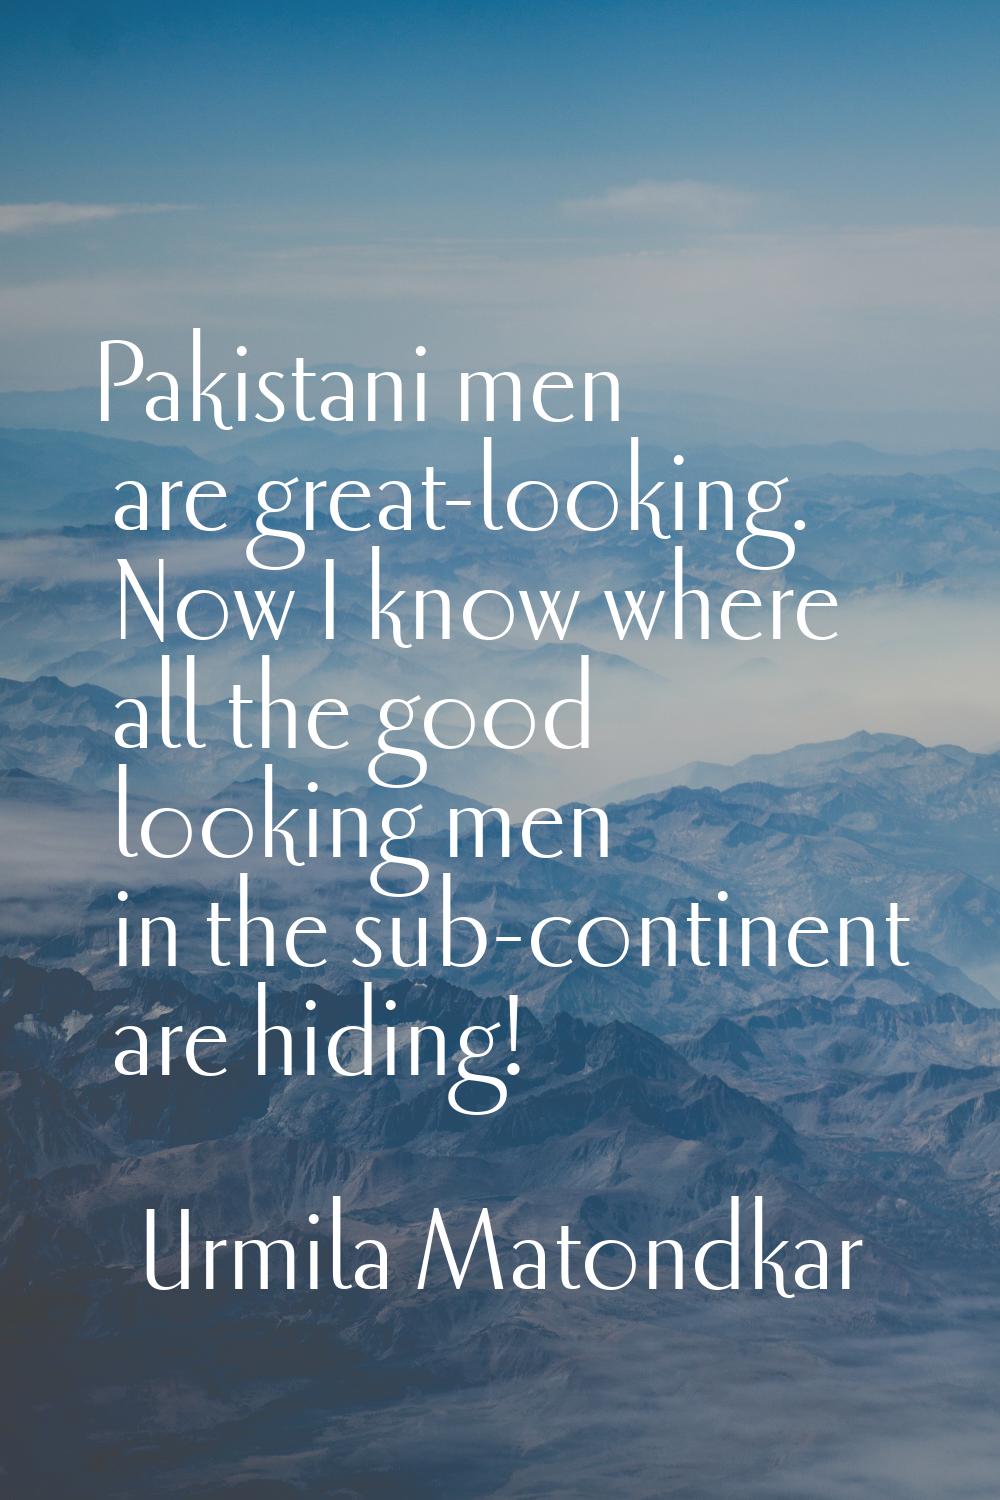 Pakistani men are great-looking. Now I know where all the good looking men in the sub-continent are